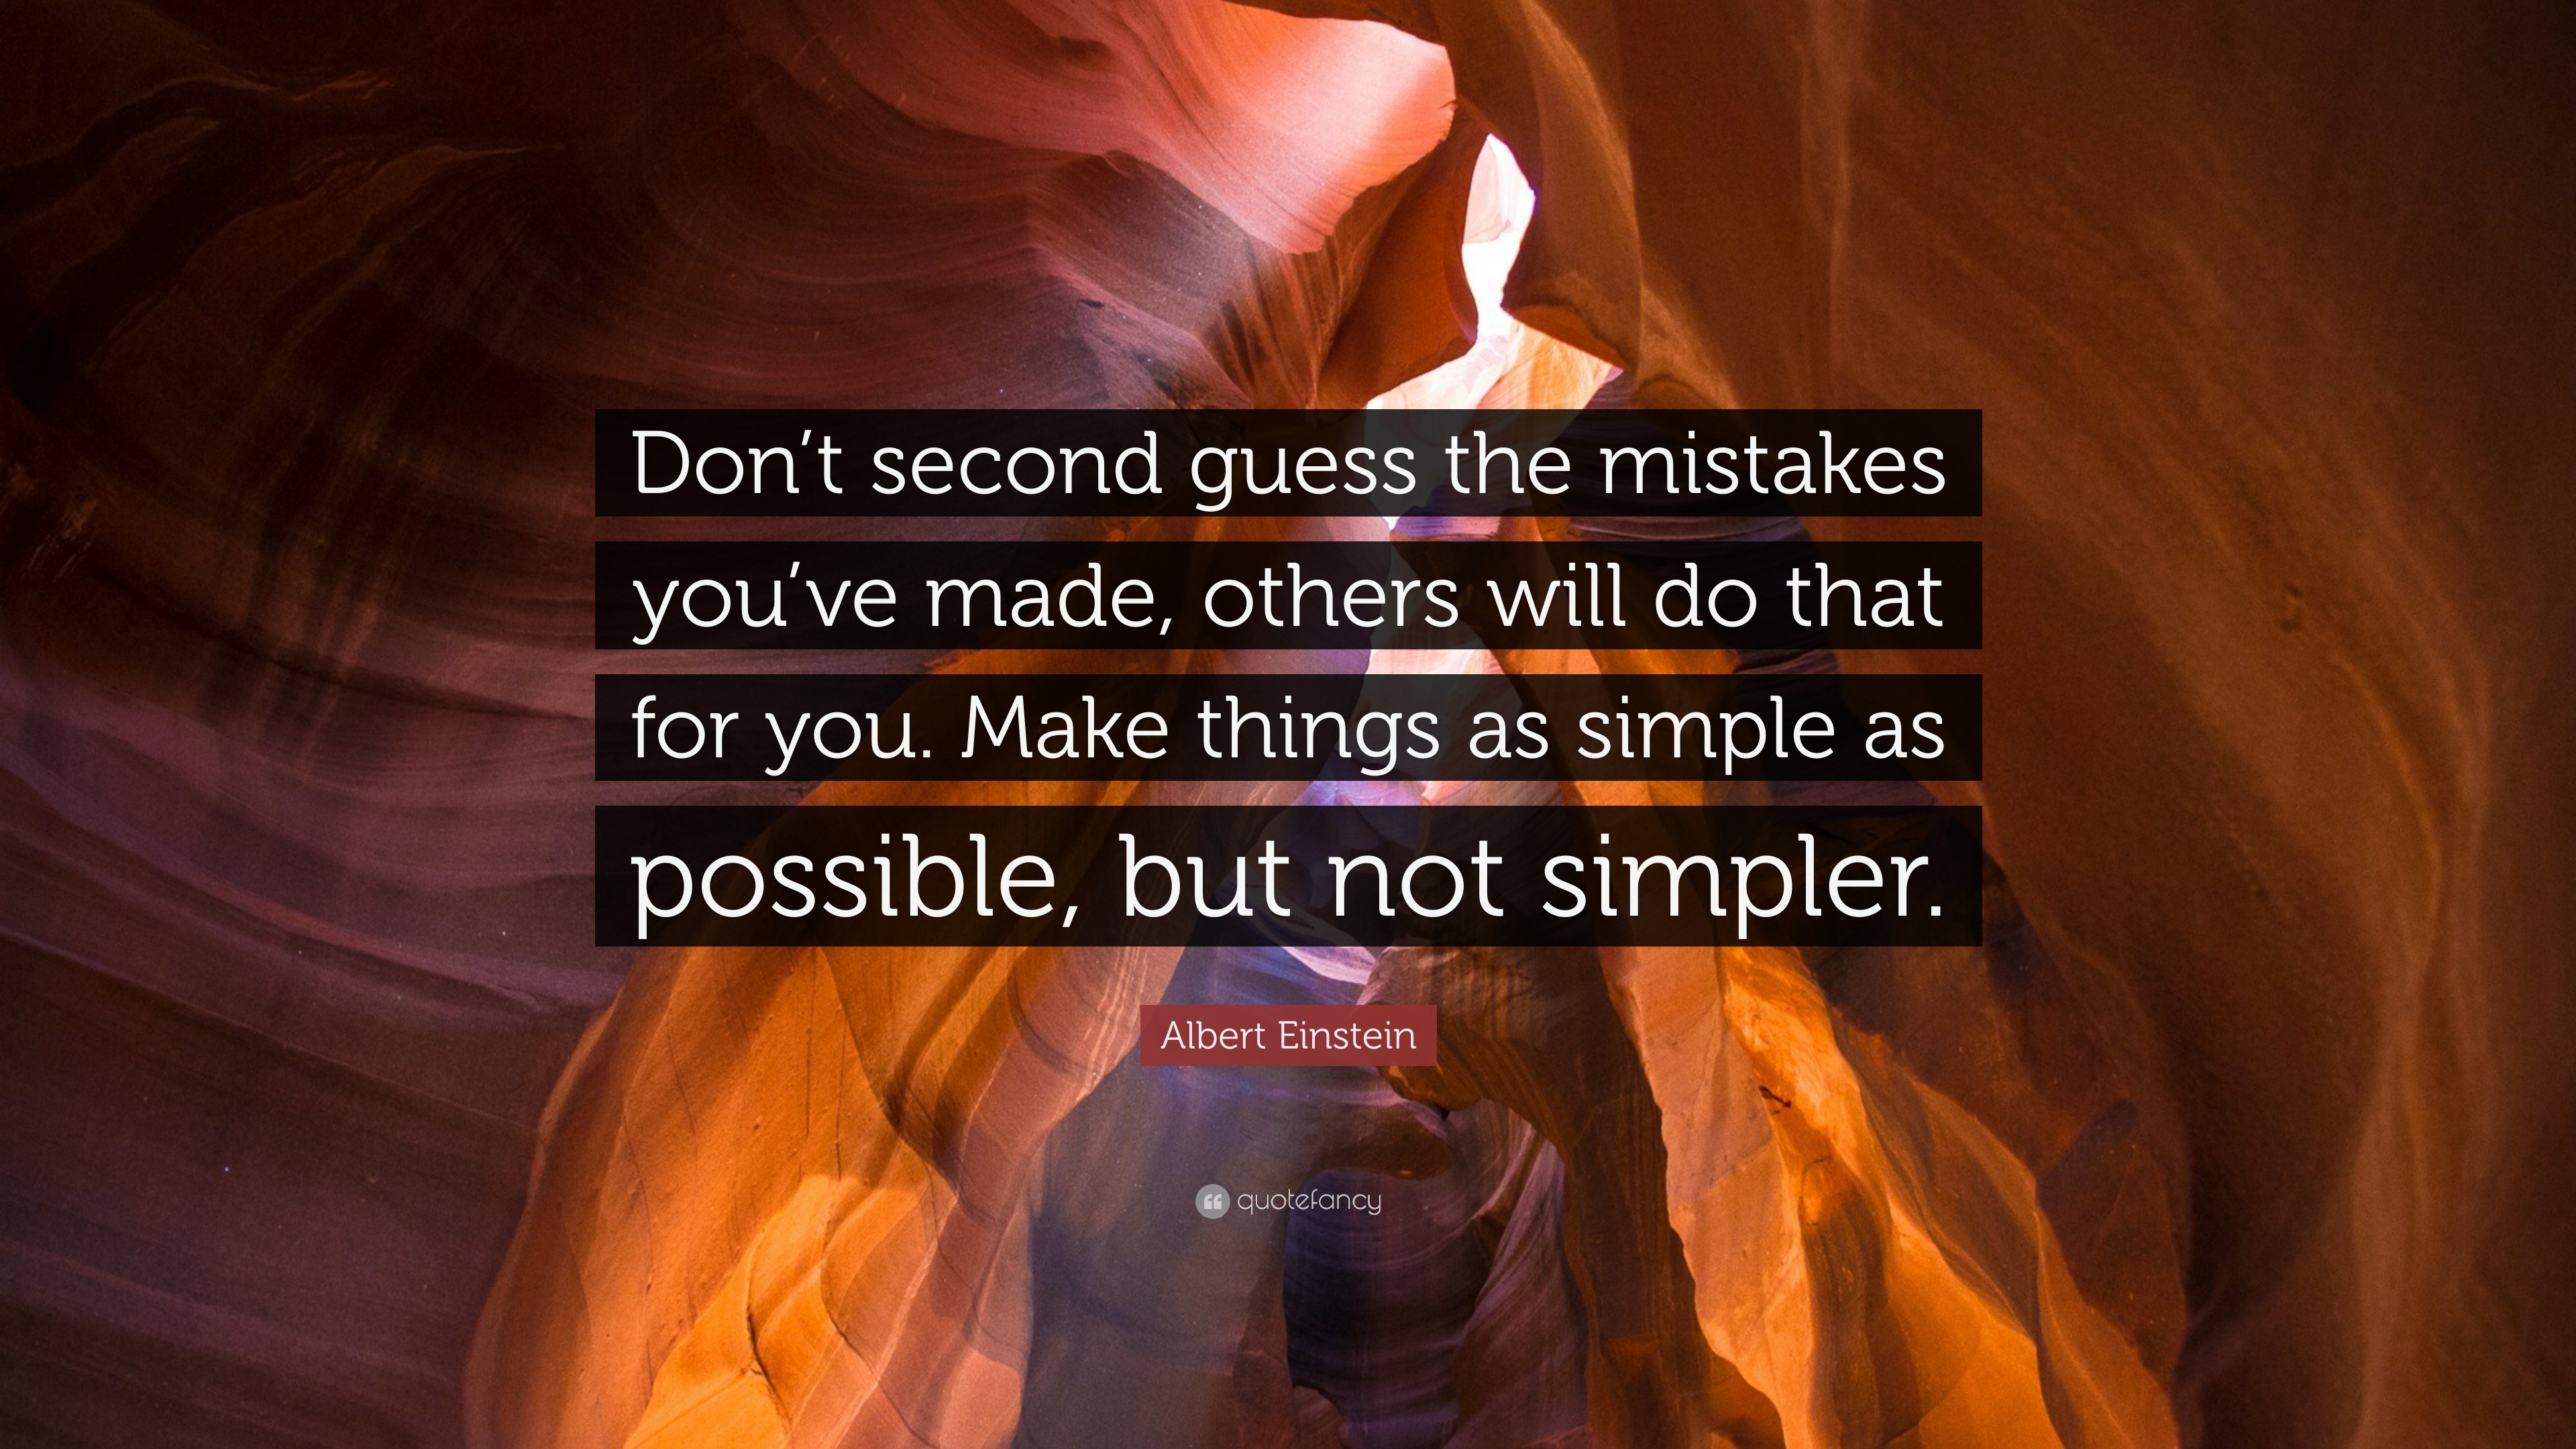 Derfor musikkens Slagskib Albert Einstein Quote: “Don't second guess the mistakes you've made, others  will do that for you. Make things as simple as possible, but not sim...”